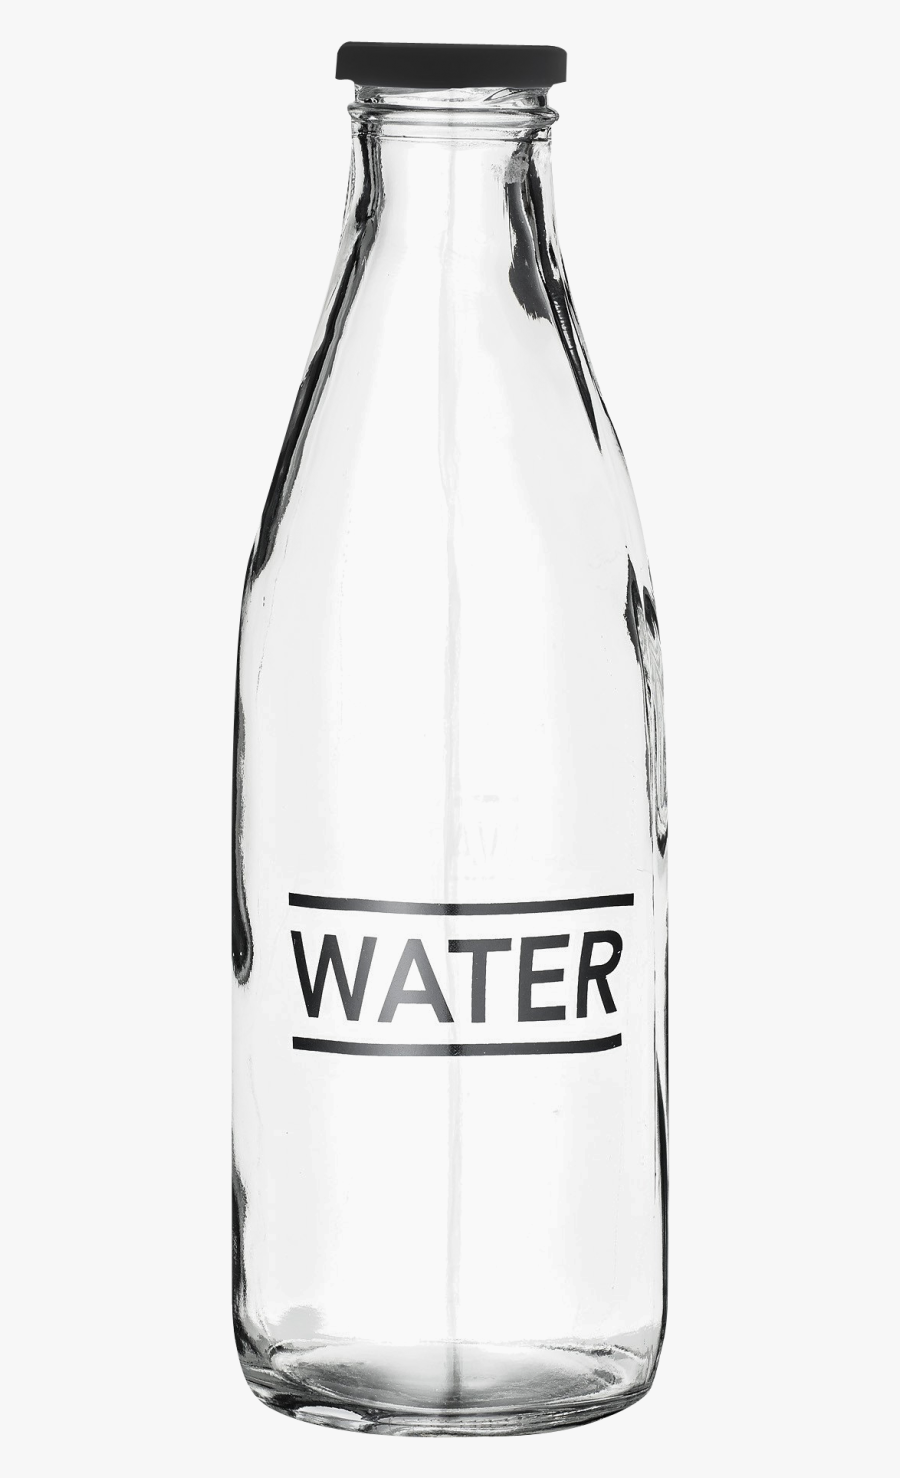 Glass Water Bottle Png Image - Glass Water Bottle Transparent, Transparent Clipart